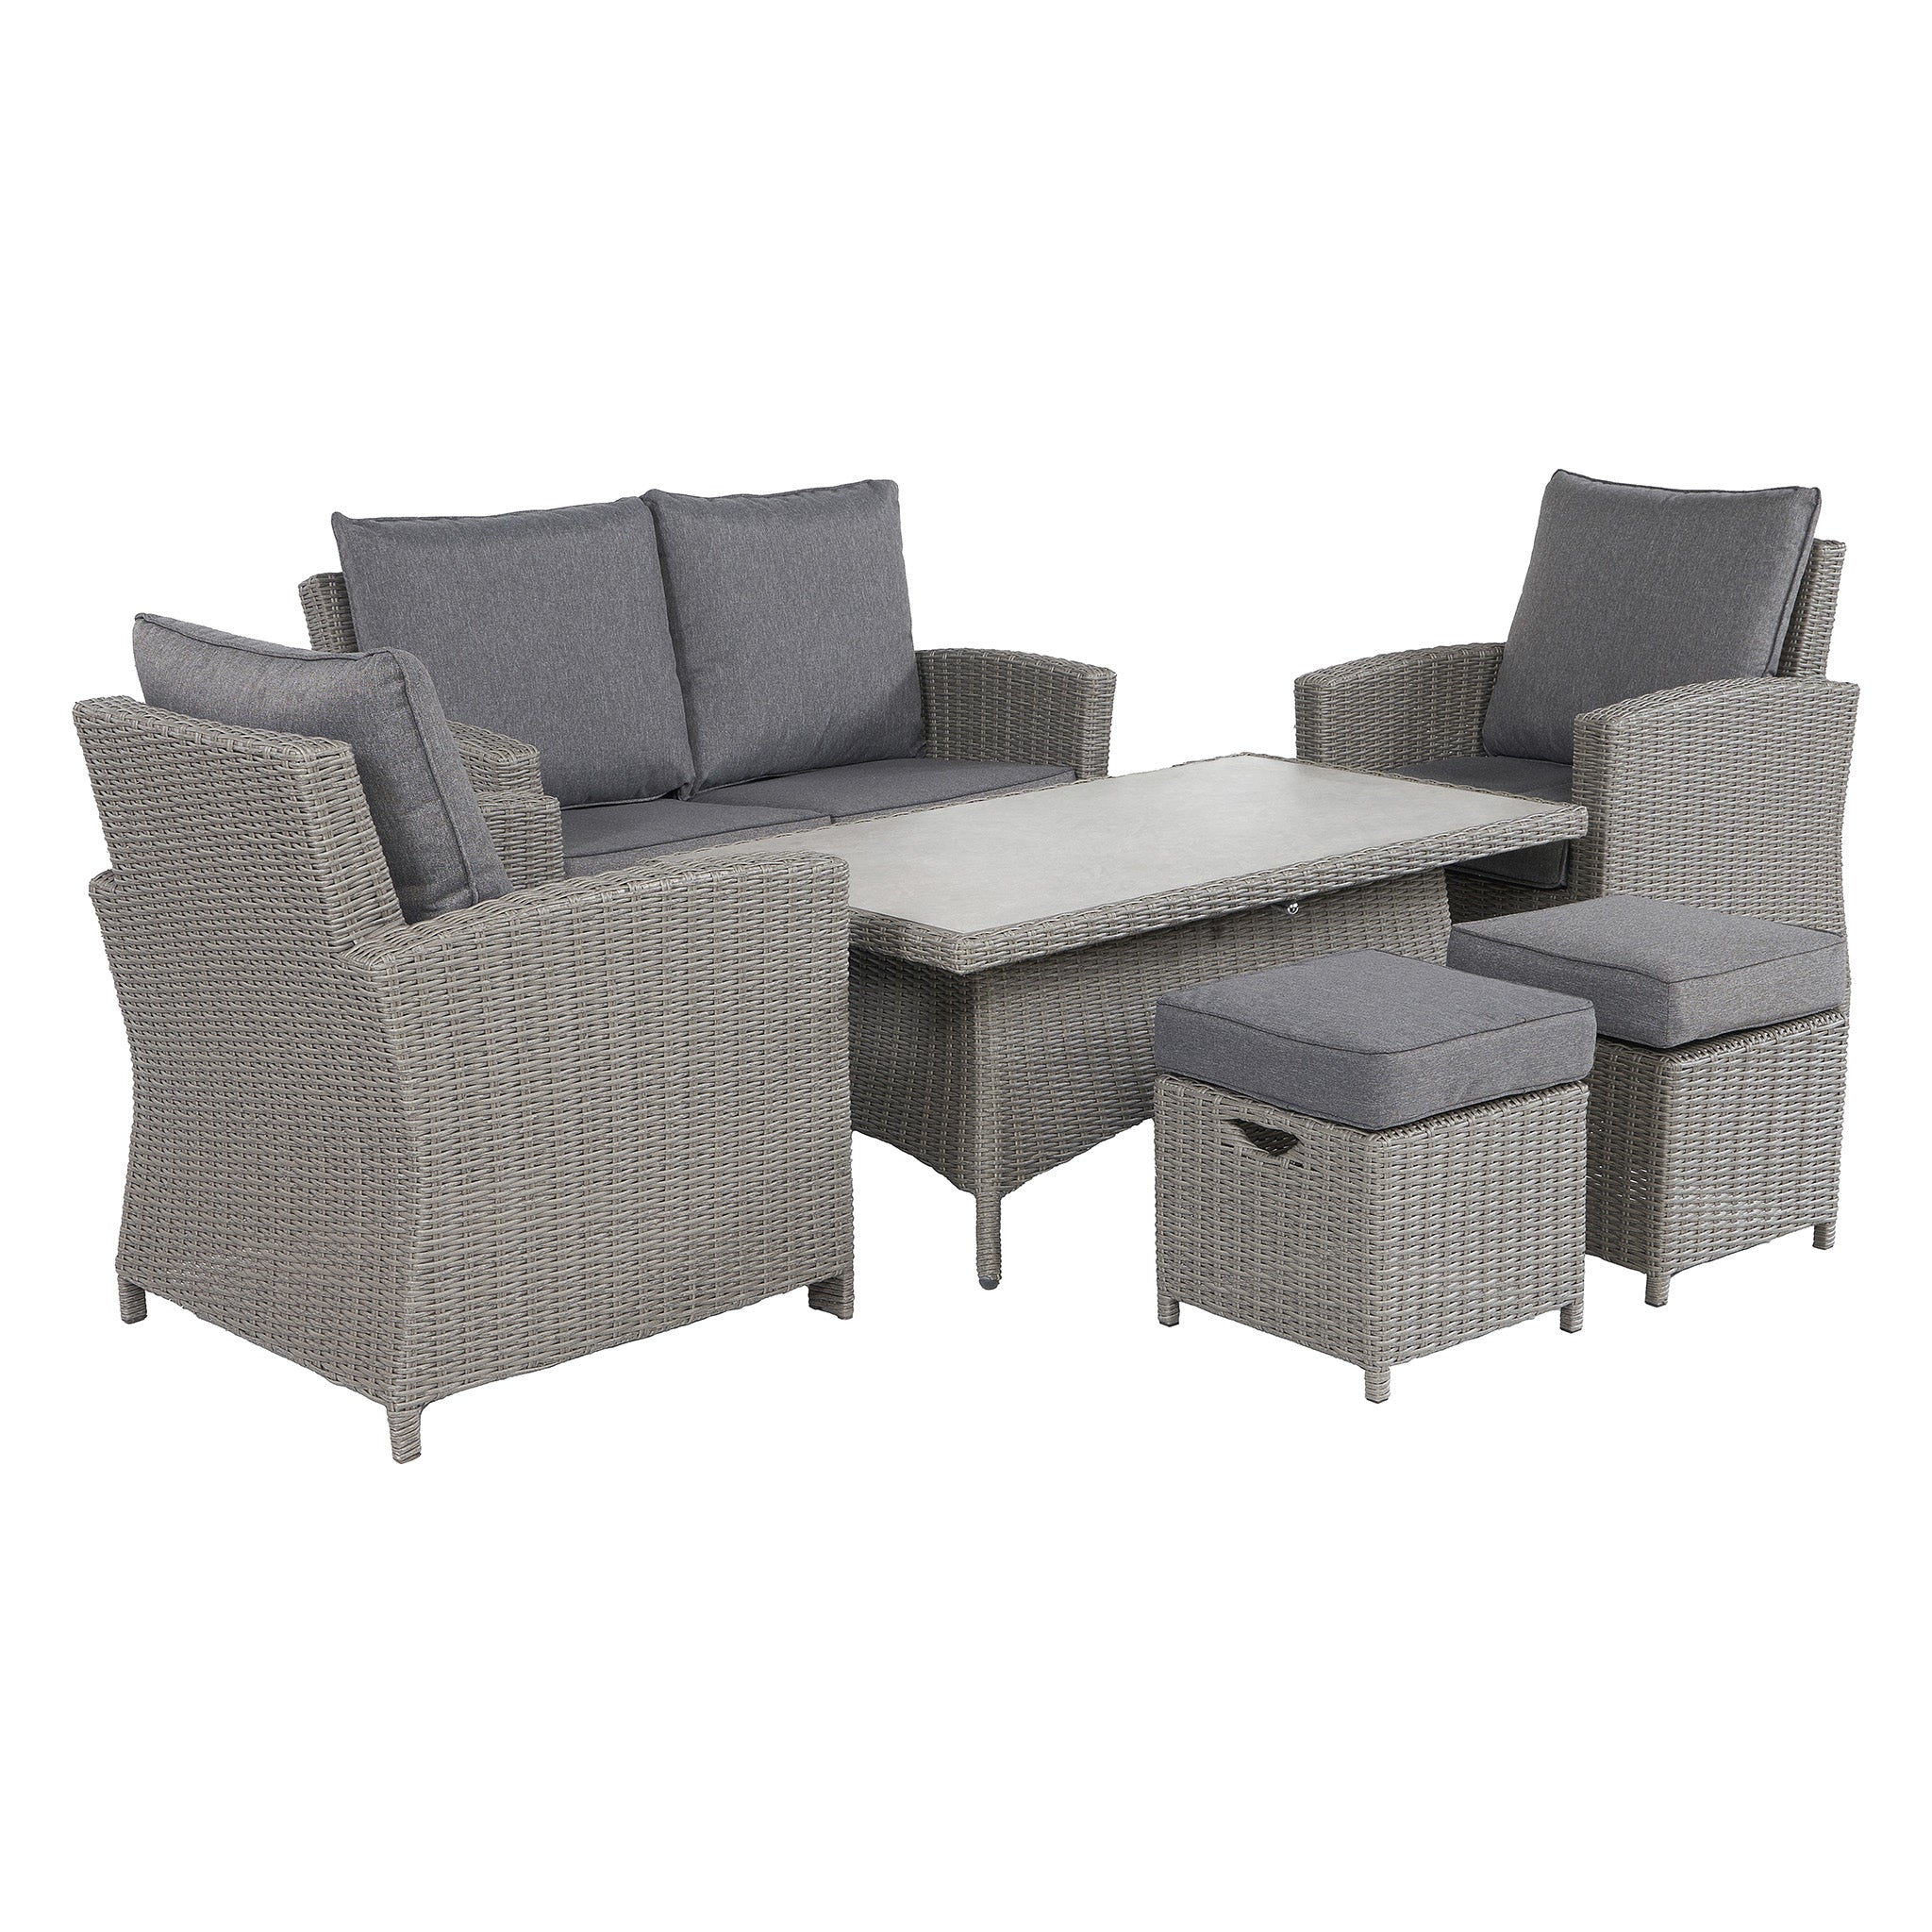 Barbados 2 Seat Rattan Sofa Dining Set with Rising Table in Slate Grey